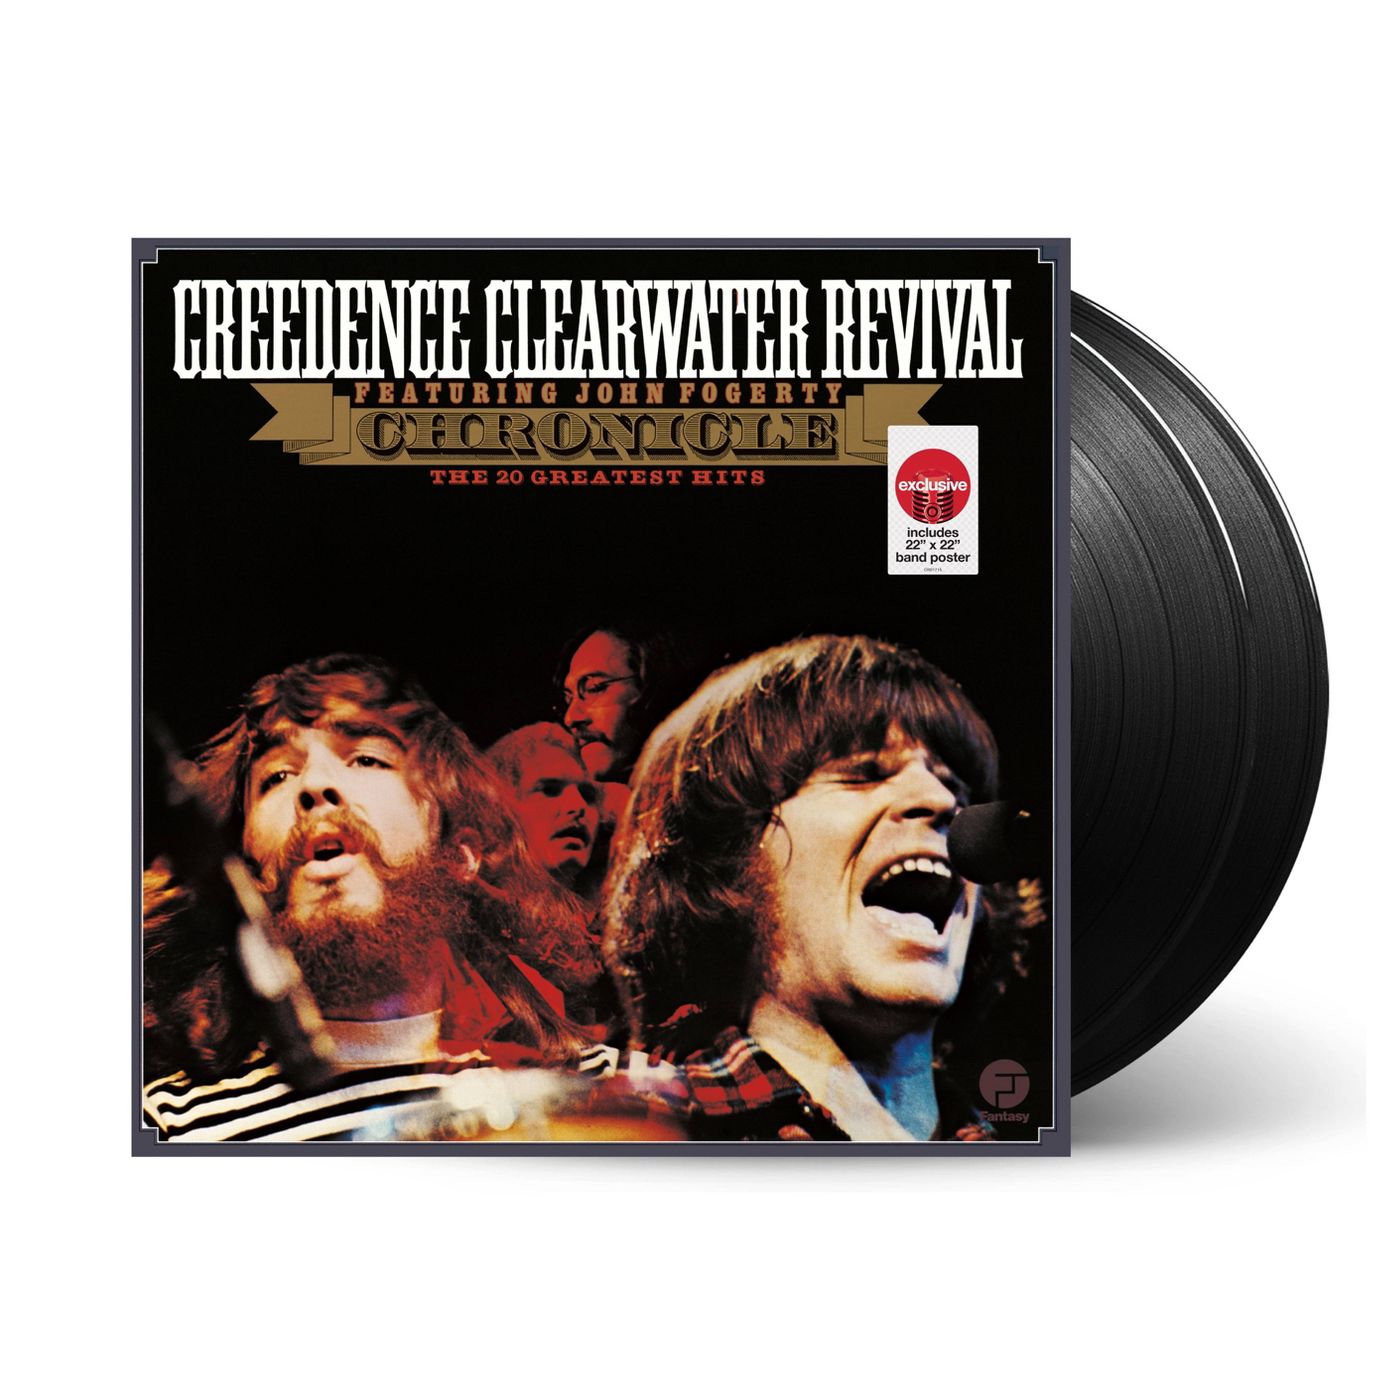 CREEDENCE CLEARWATER REVIVAL / クリーデンス・クリアウォーター・リバイバル / CHRONICLE: 20 GREATEST HITS (TARGET EXCLUSIVE 2LP+POSTER)